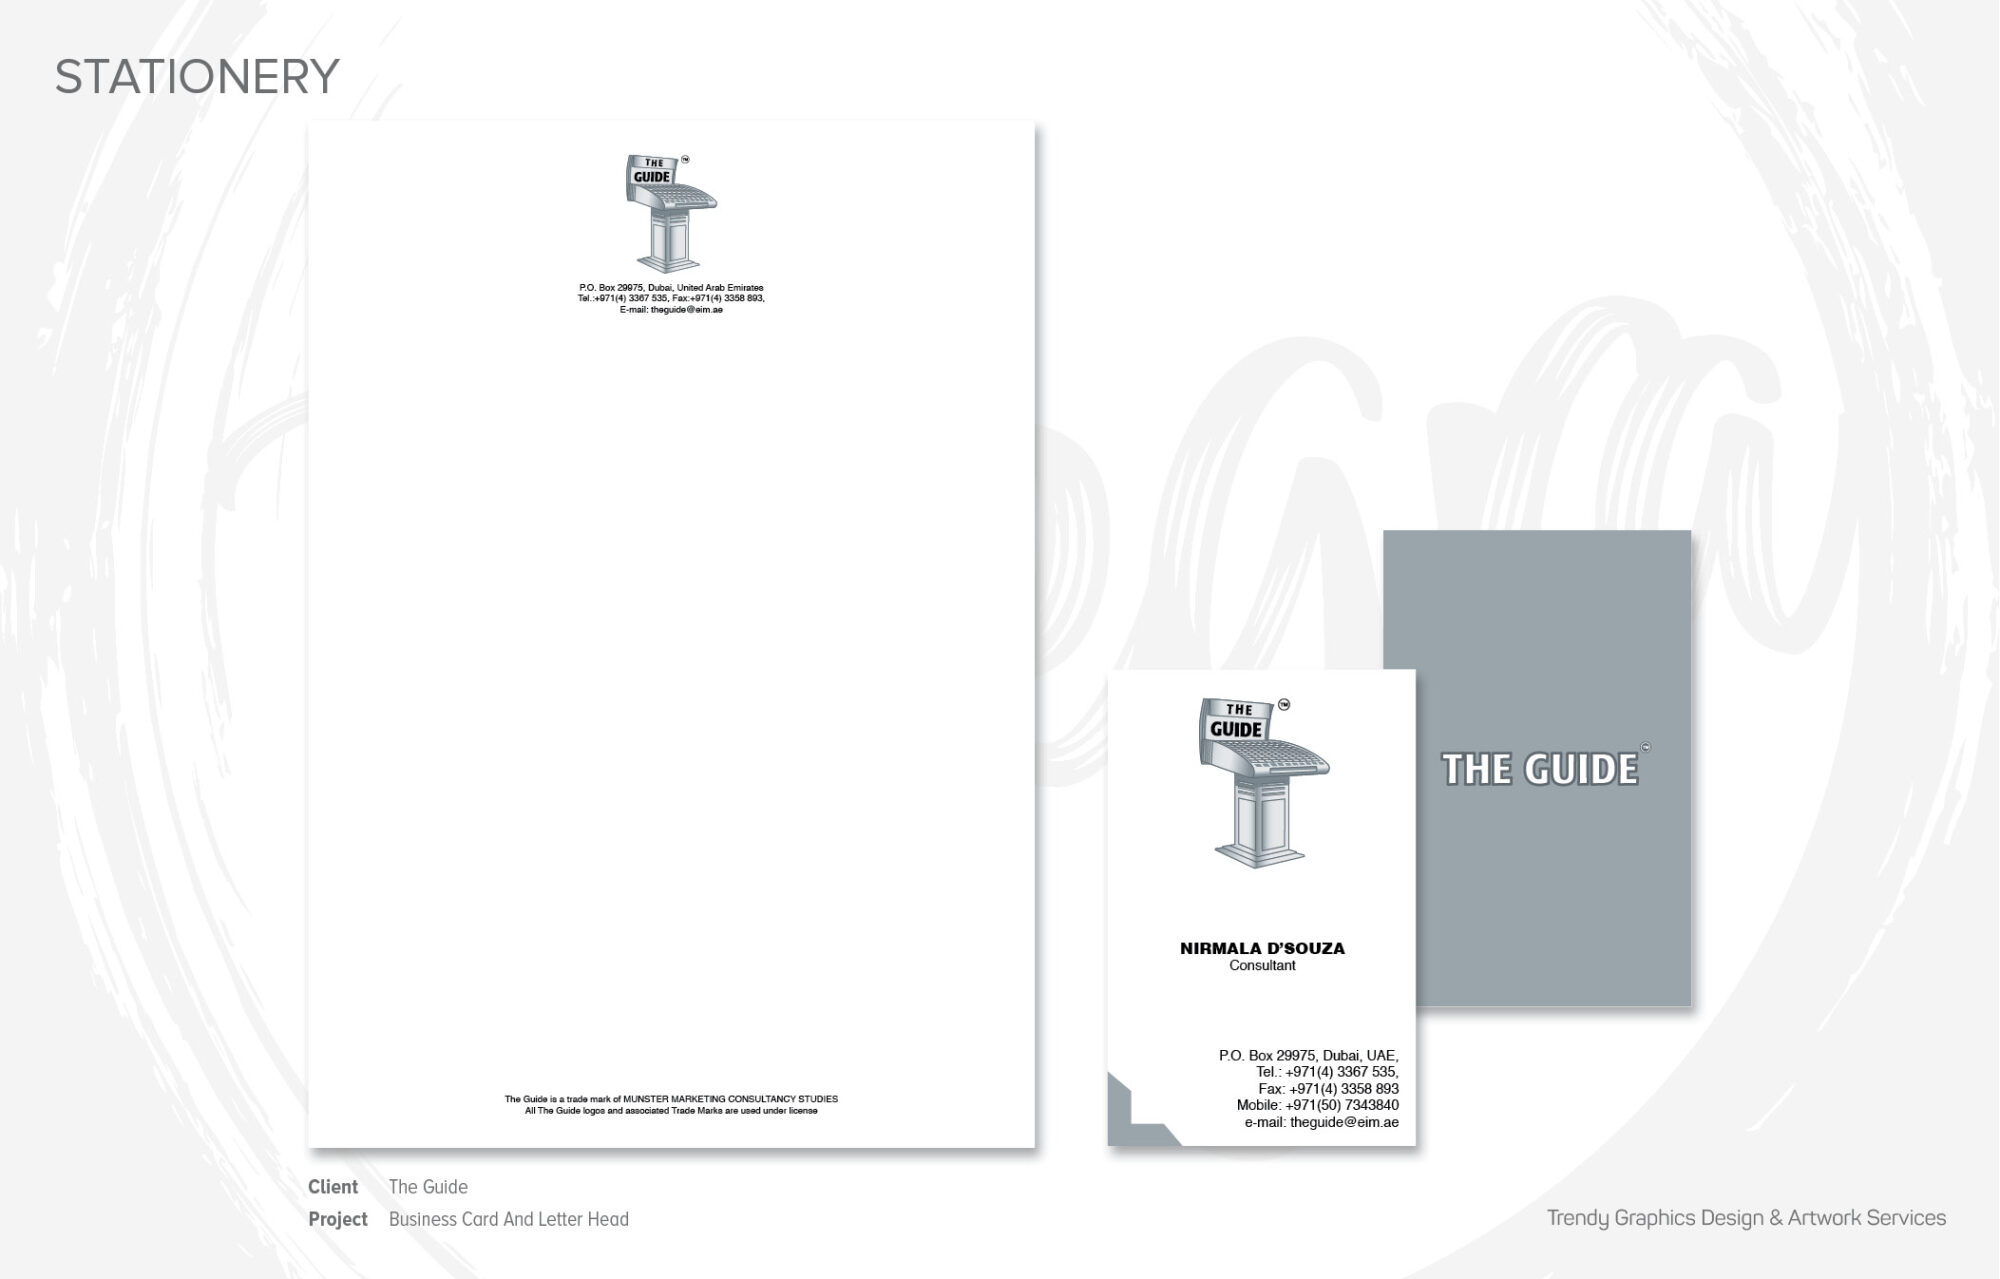 The Guide – Business Card And Letter Head